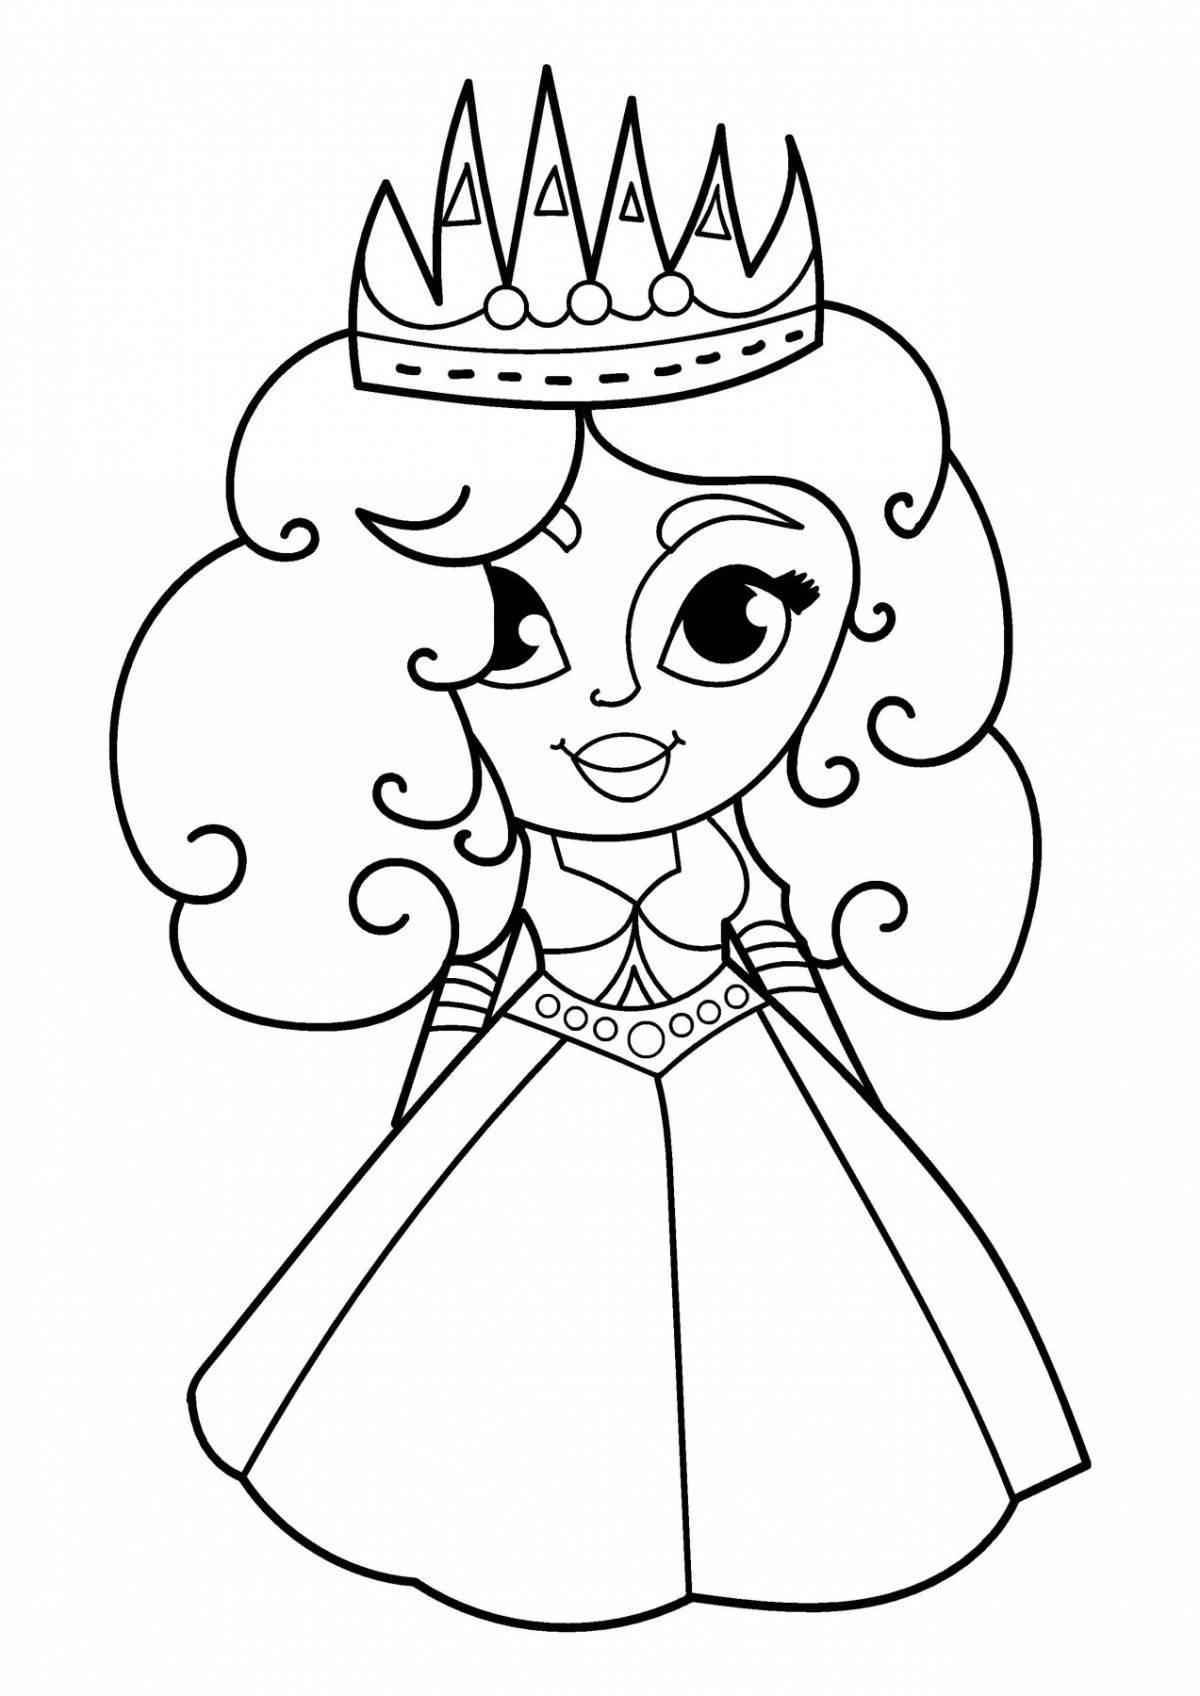 Fun princess coloring pages for girls 7 years old